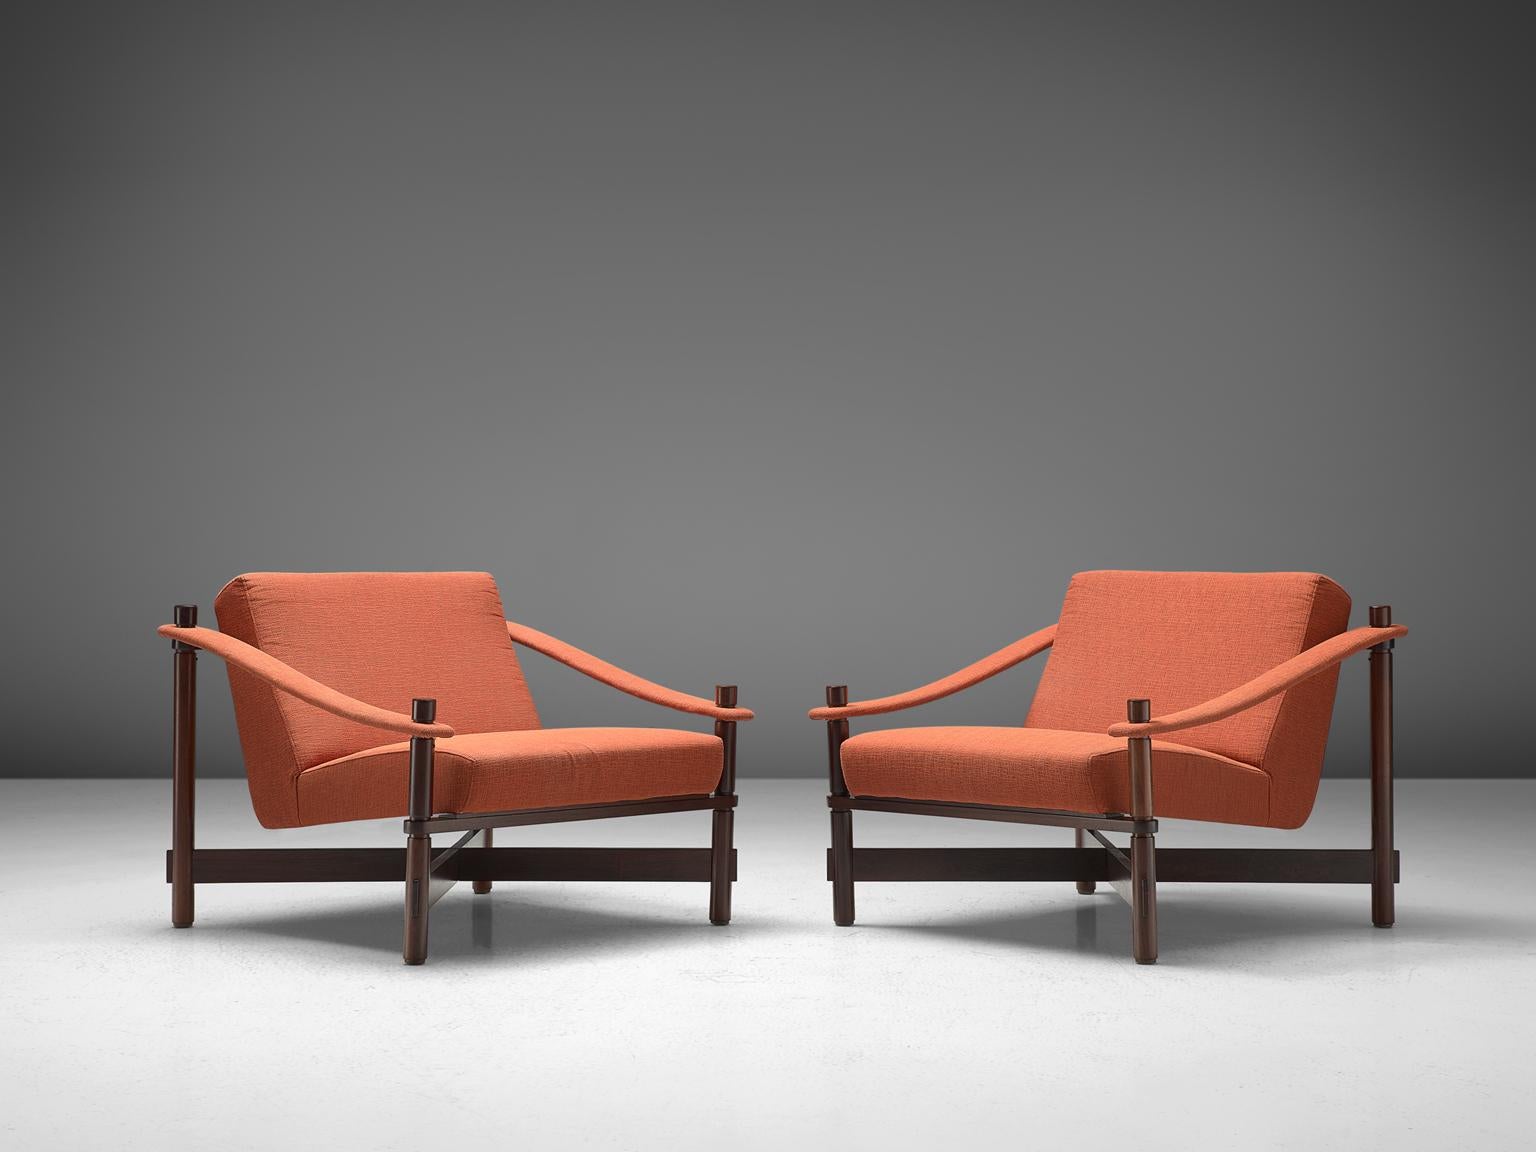 Rafaella Crespi, pair of lounge chairs, rosewood and fabric, Italy, 1960. 

These rare Italian chairs are of the highest-quality in both material and design. The combination of the upholstery and the warm solid rosewood frame is just beautiful.